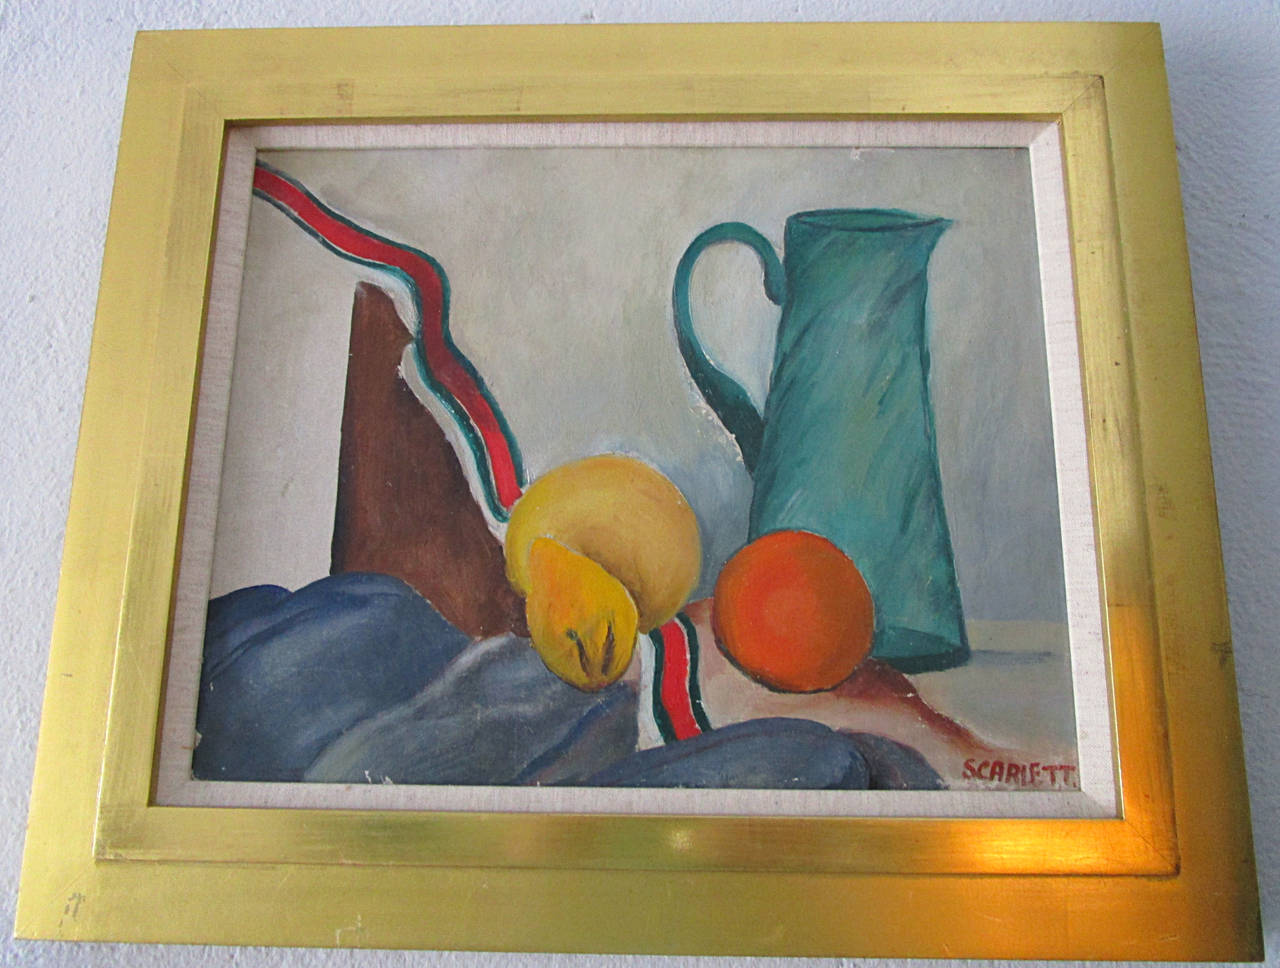 Rolph Scarlett (1889-1984) oil on canvas untitled still life. Image size 11.5